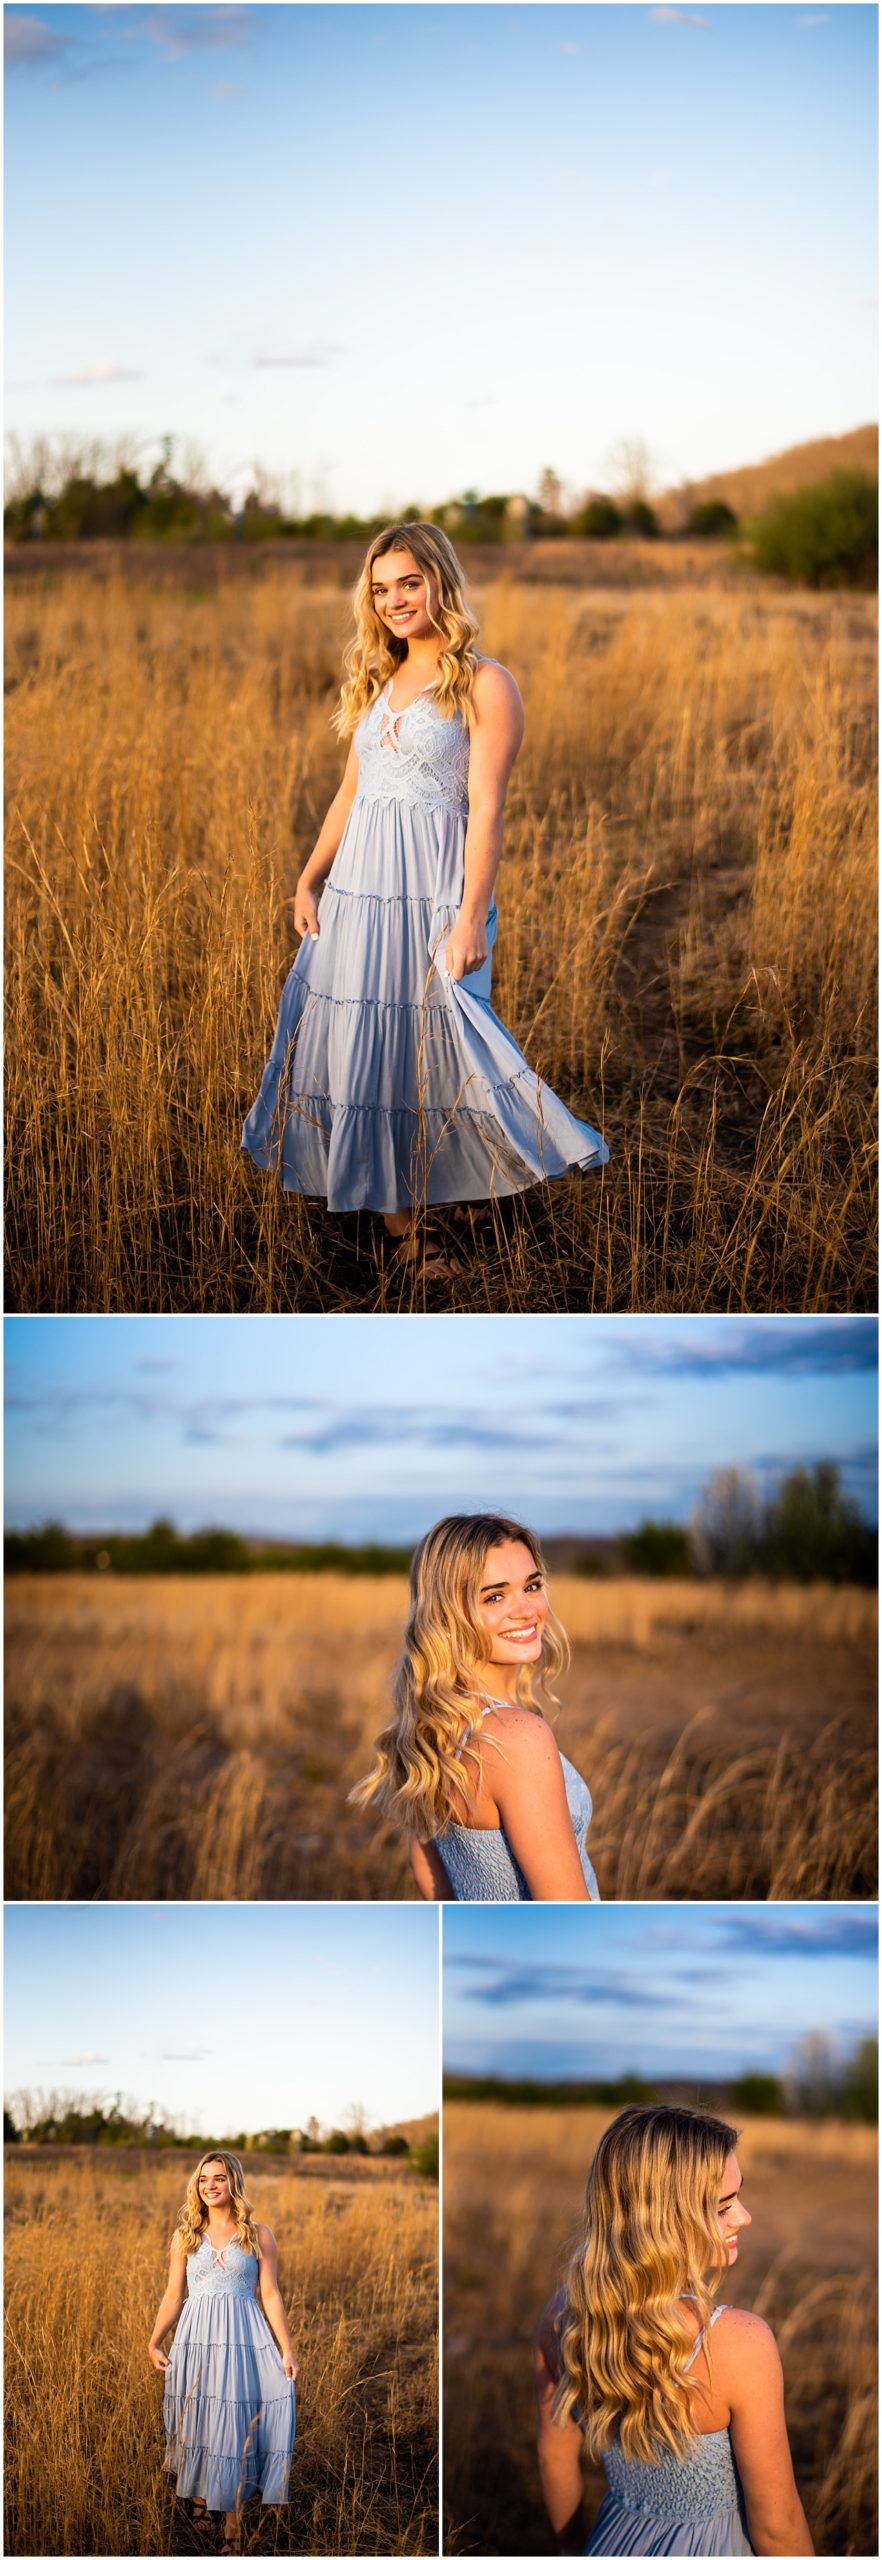 Blonde girl in a field wearing a light blue dress with sandals.